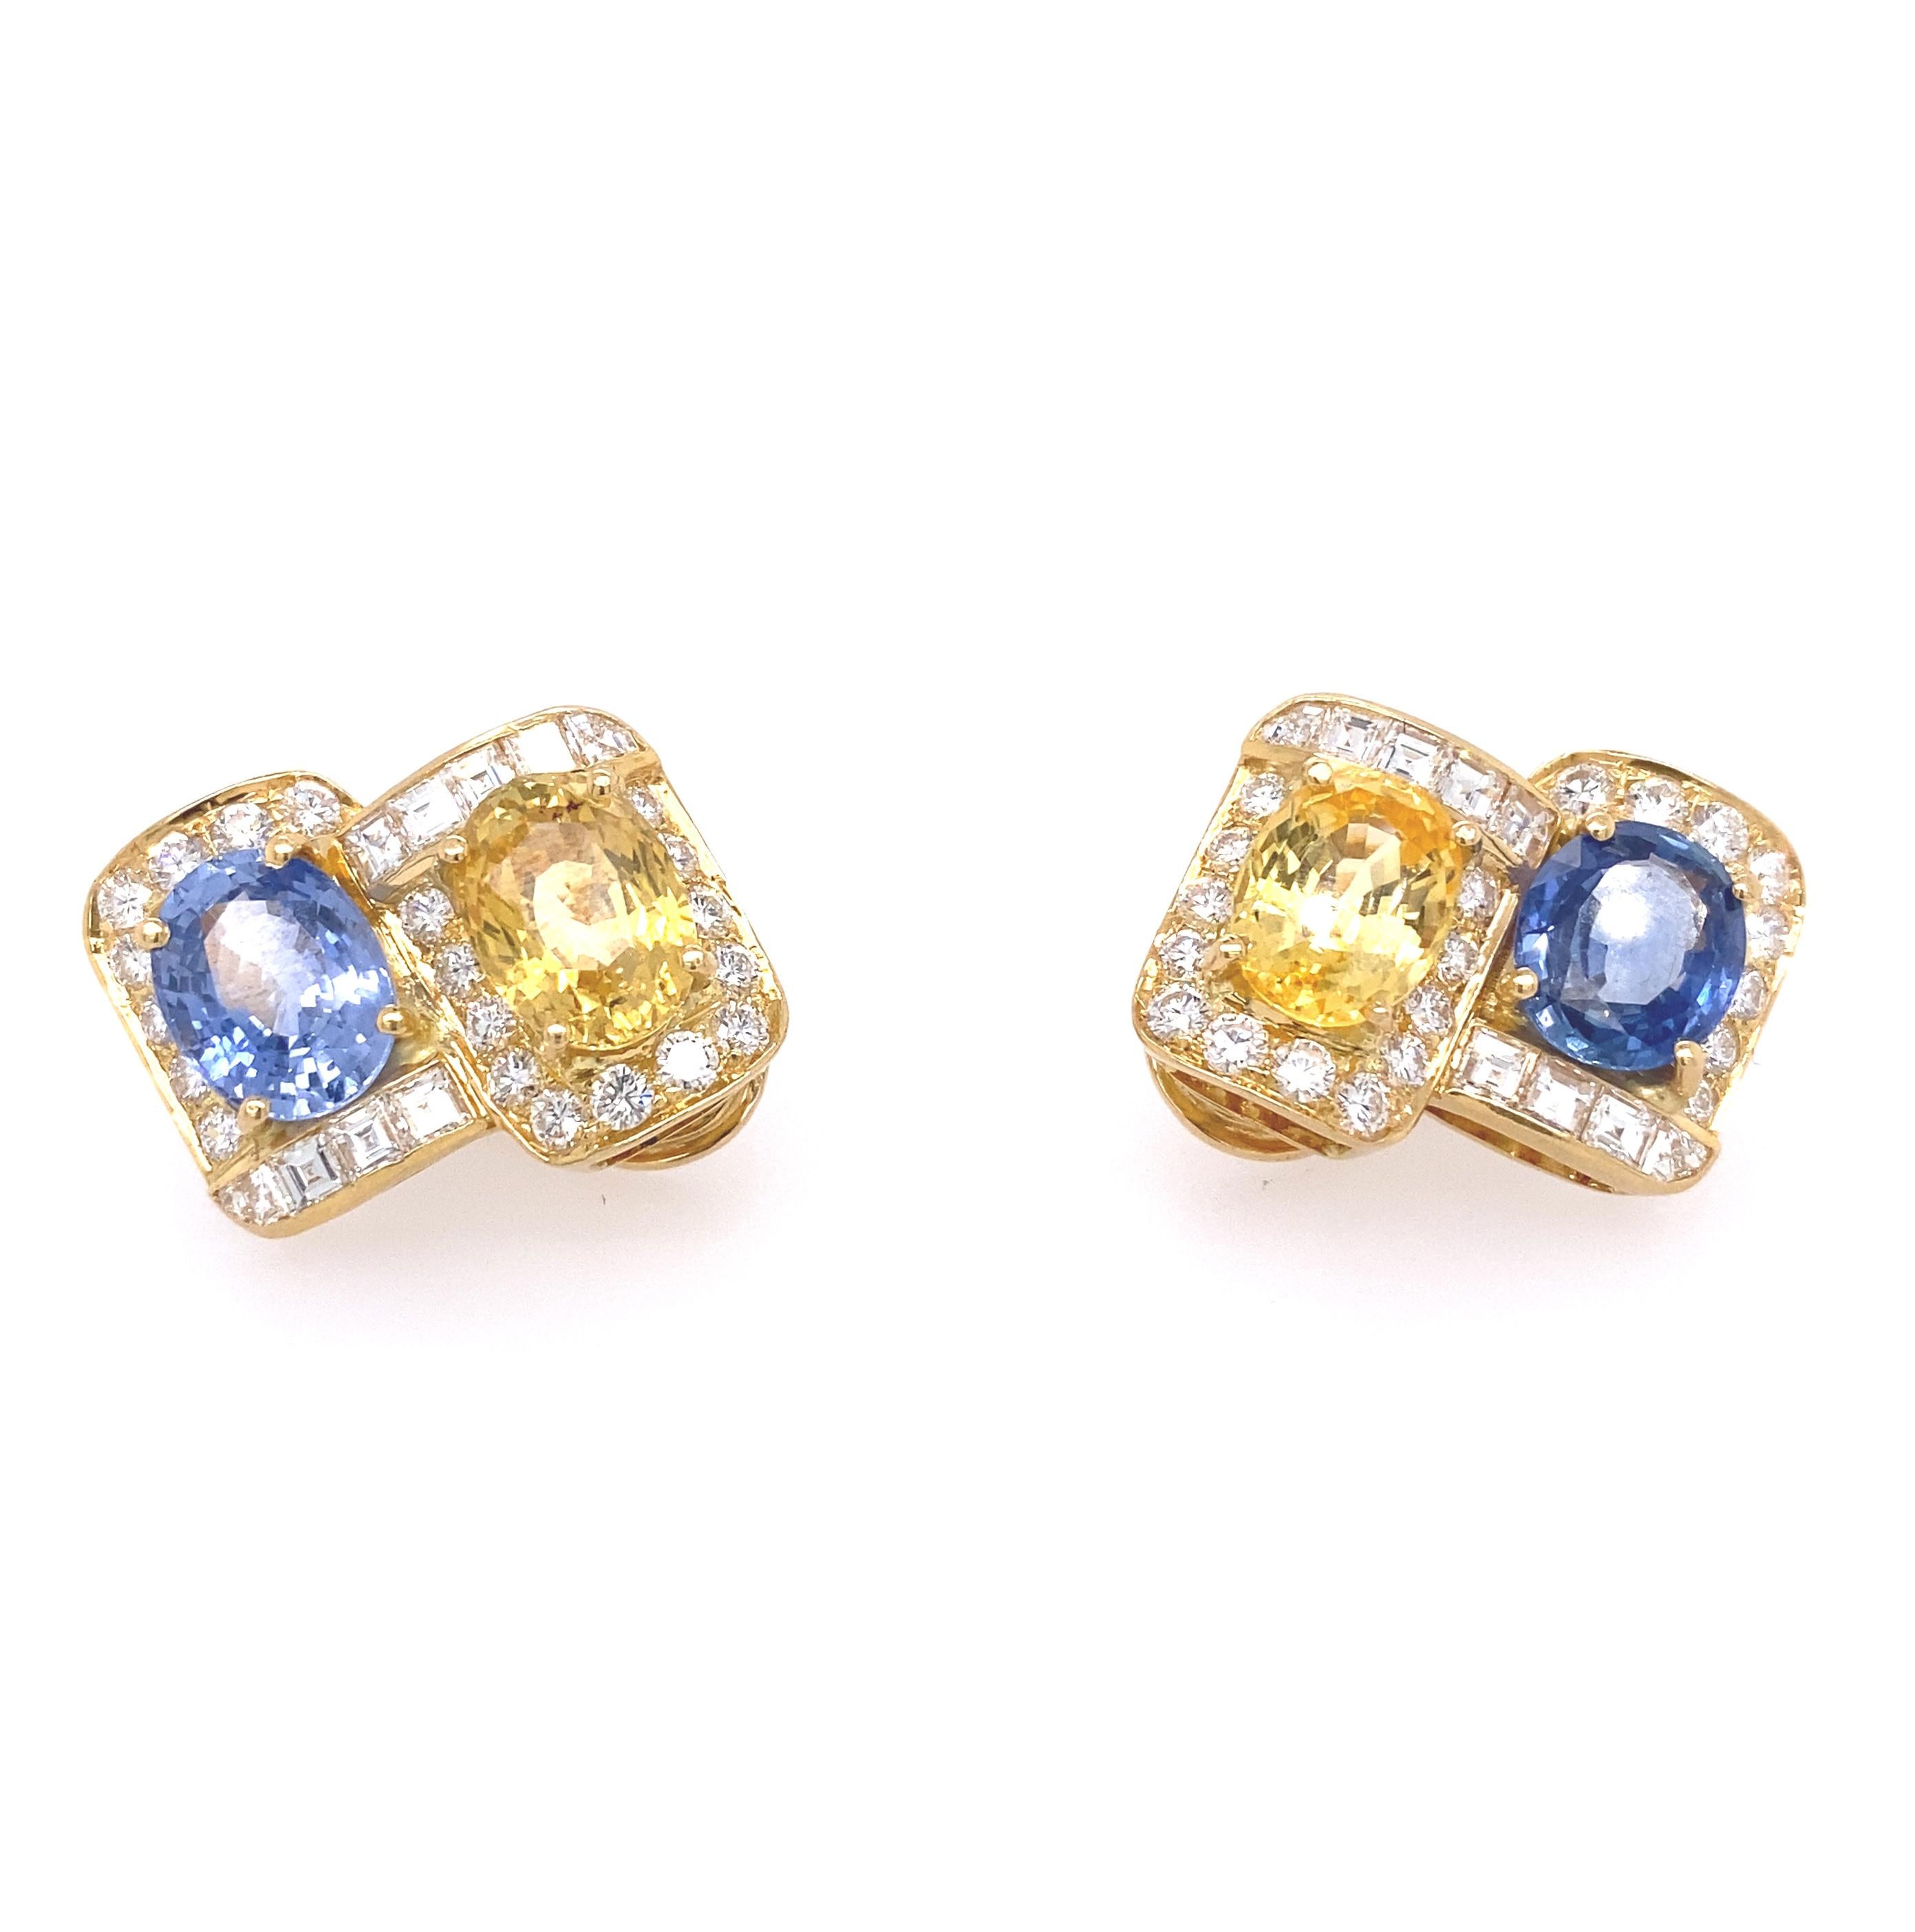 Bvlgari Blue and Yellow Sapphire Diamond earrings with approximately 4- 5 cts of diamonds and about 12 cts of sapphire.
Total weight 13.6 dwt  Measurements 19.11 mm x  22.23 mm 